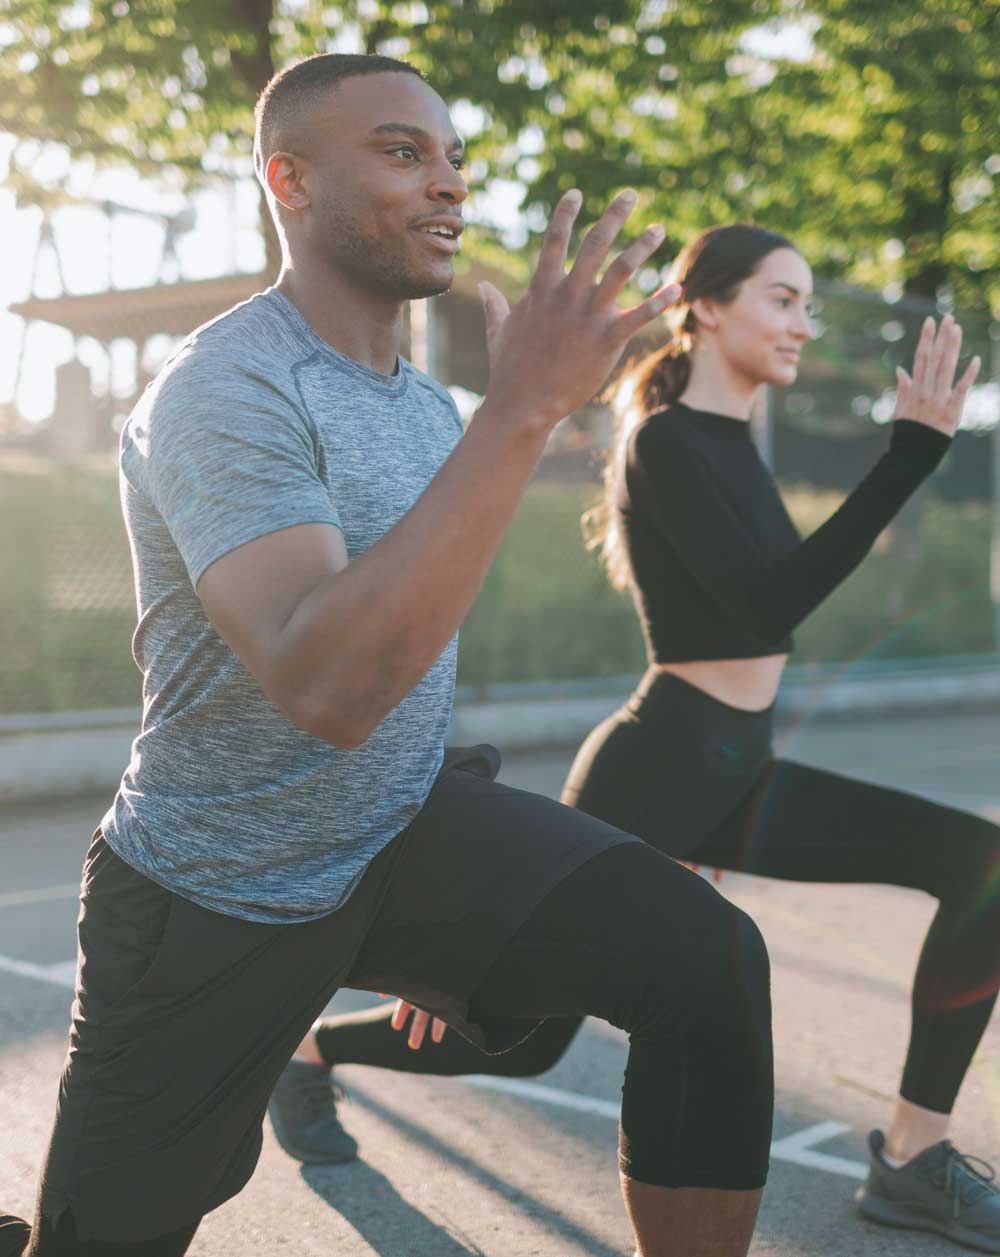 an image of a man and a woman working out outdoors